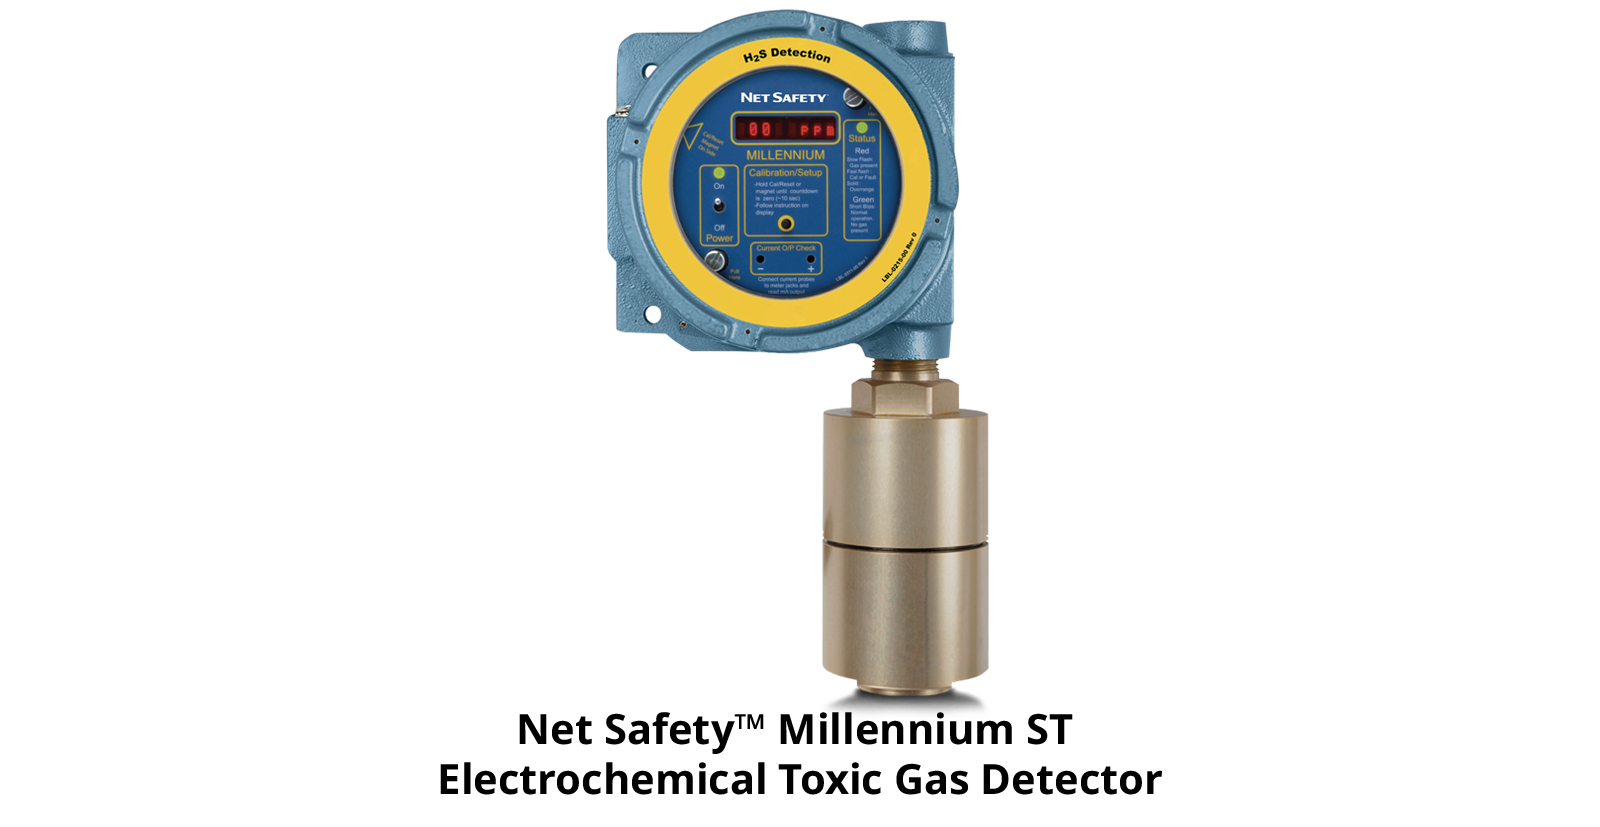 New gas detector presented, effective in hard-to-reach sites